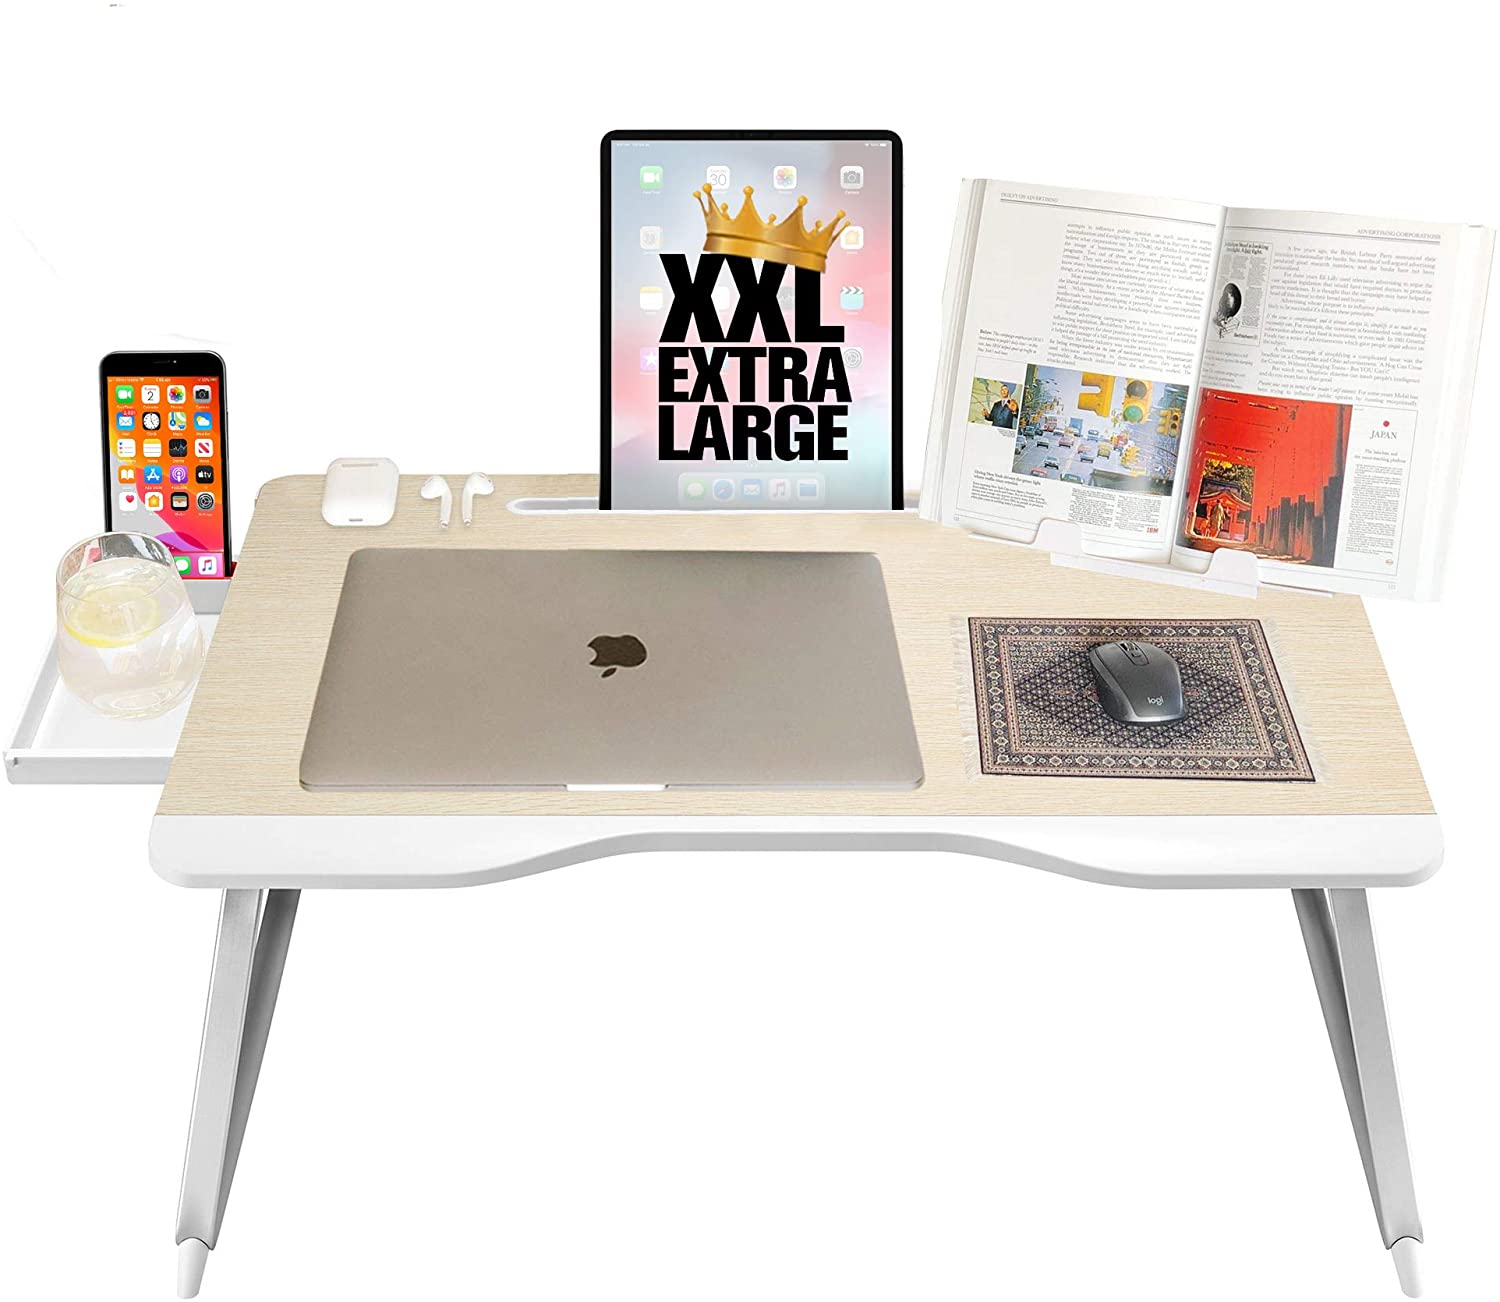 Review of Cooper Mega Table - XXL Large Folding Table & Laptop Desk for Bed